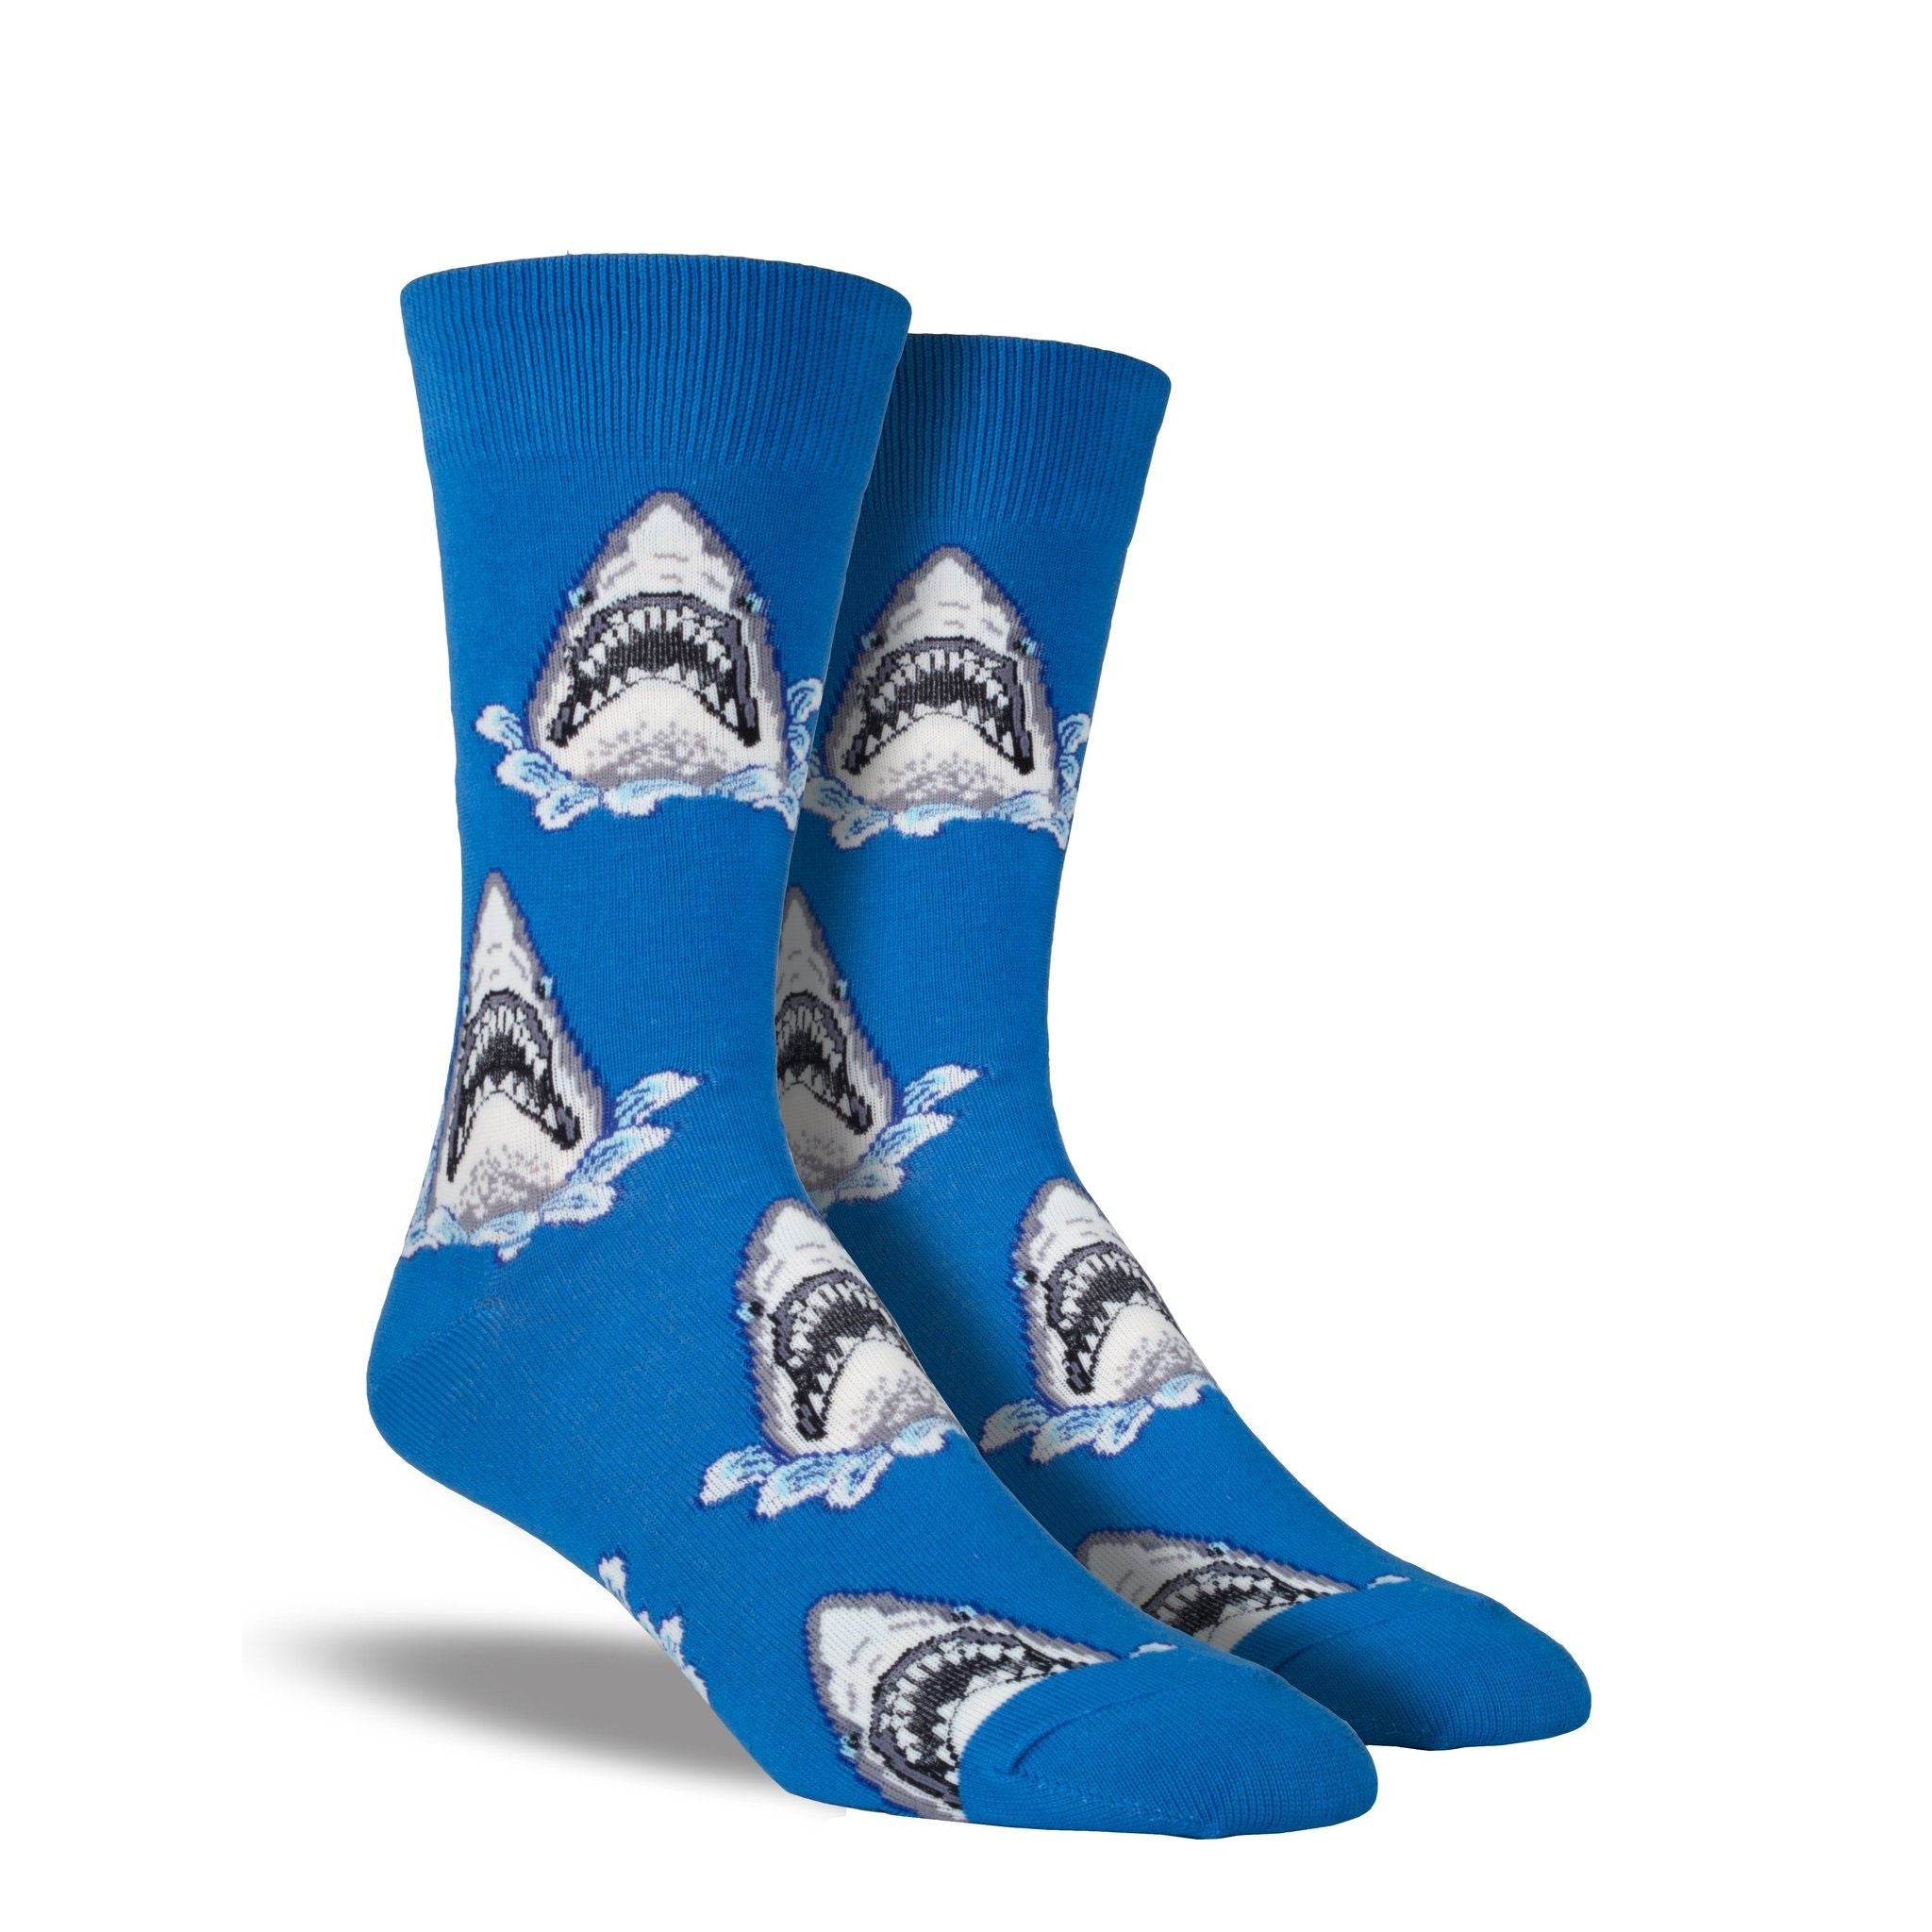 A pair of blue crew socks with sharks on them.